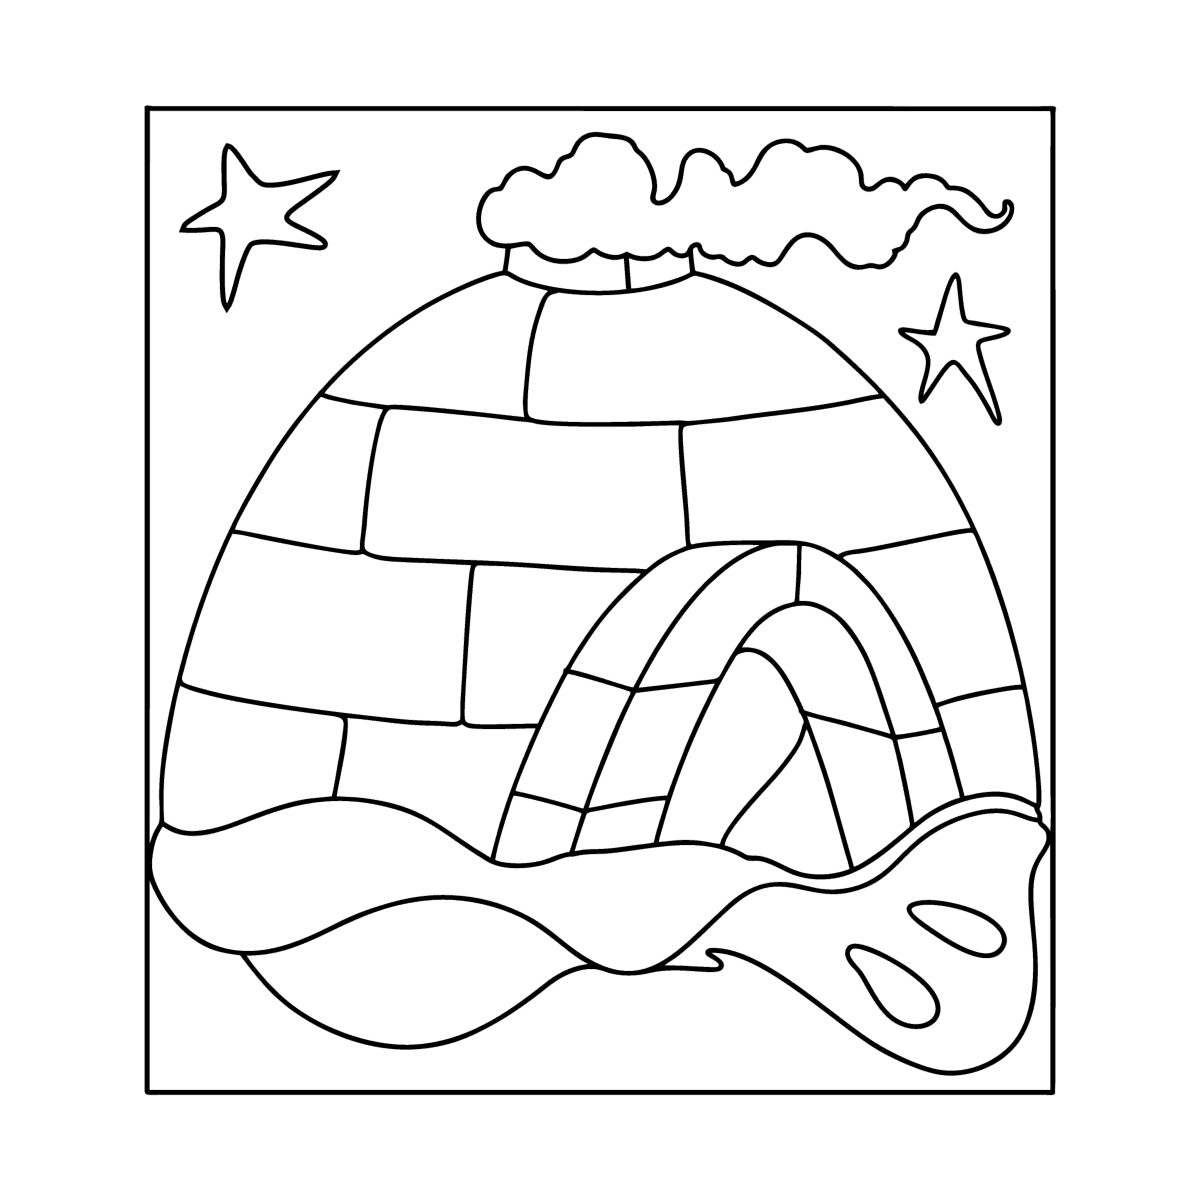 How to Draw Igloo For kids - step by step drawing | Igloo drawing, Step by  step drawing, Easy drawings for kids